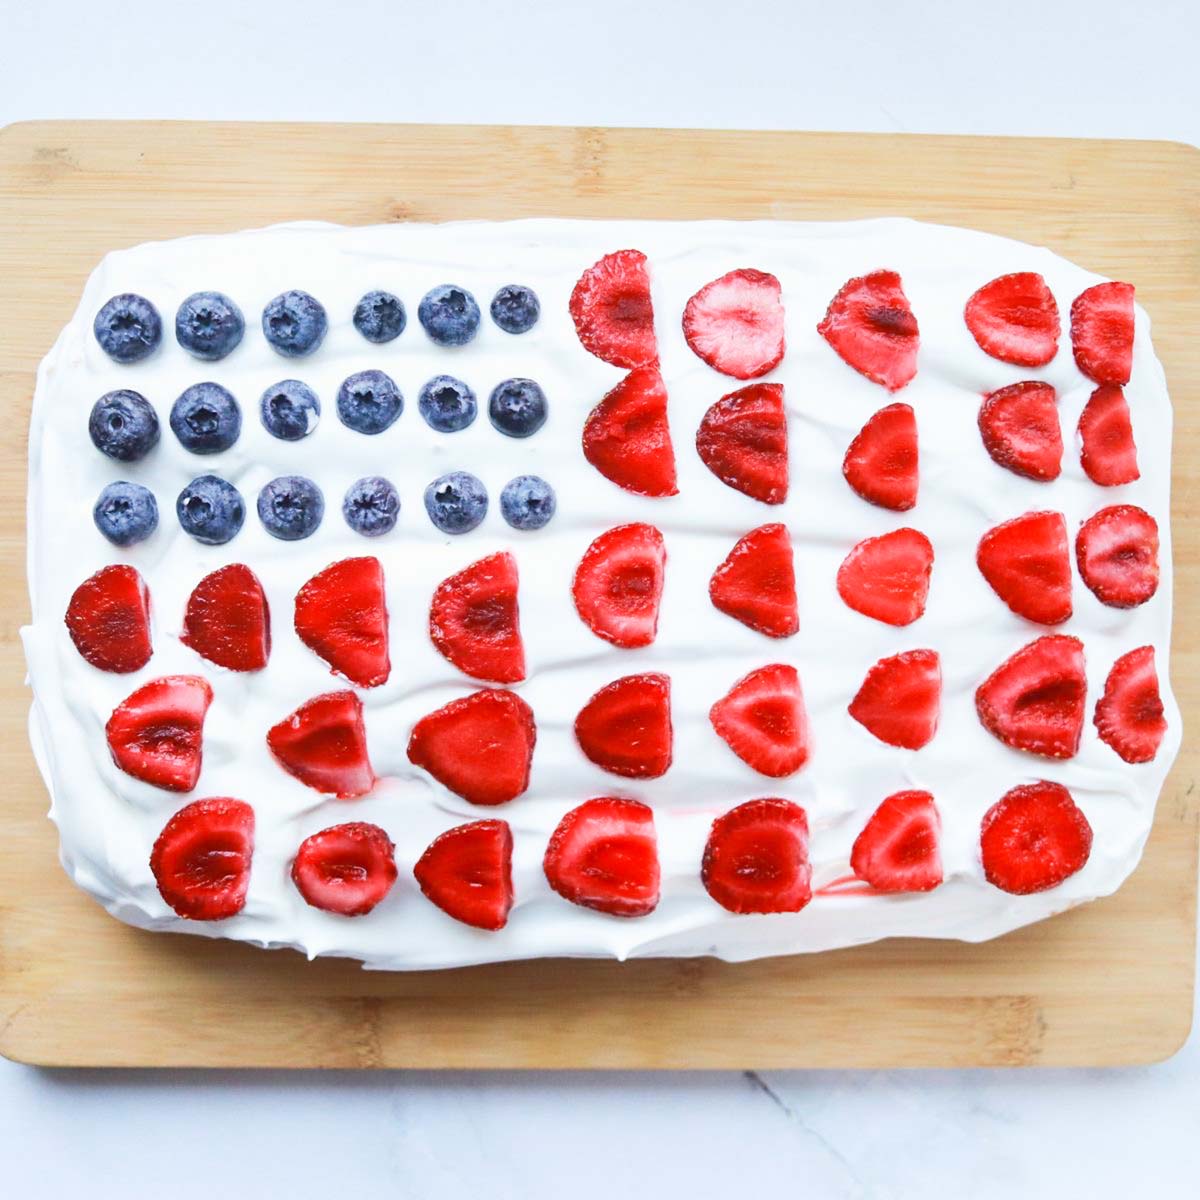 Thumbnail of American flag cake with fruit.